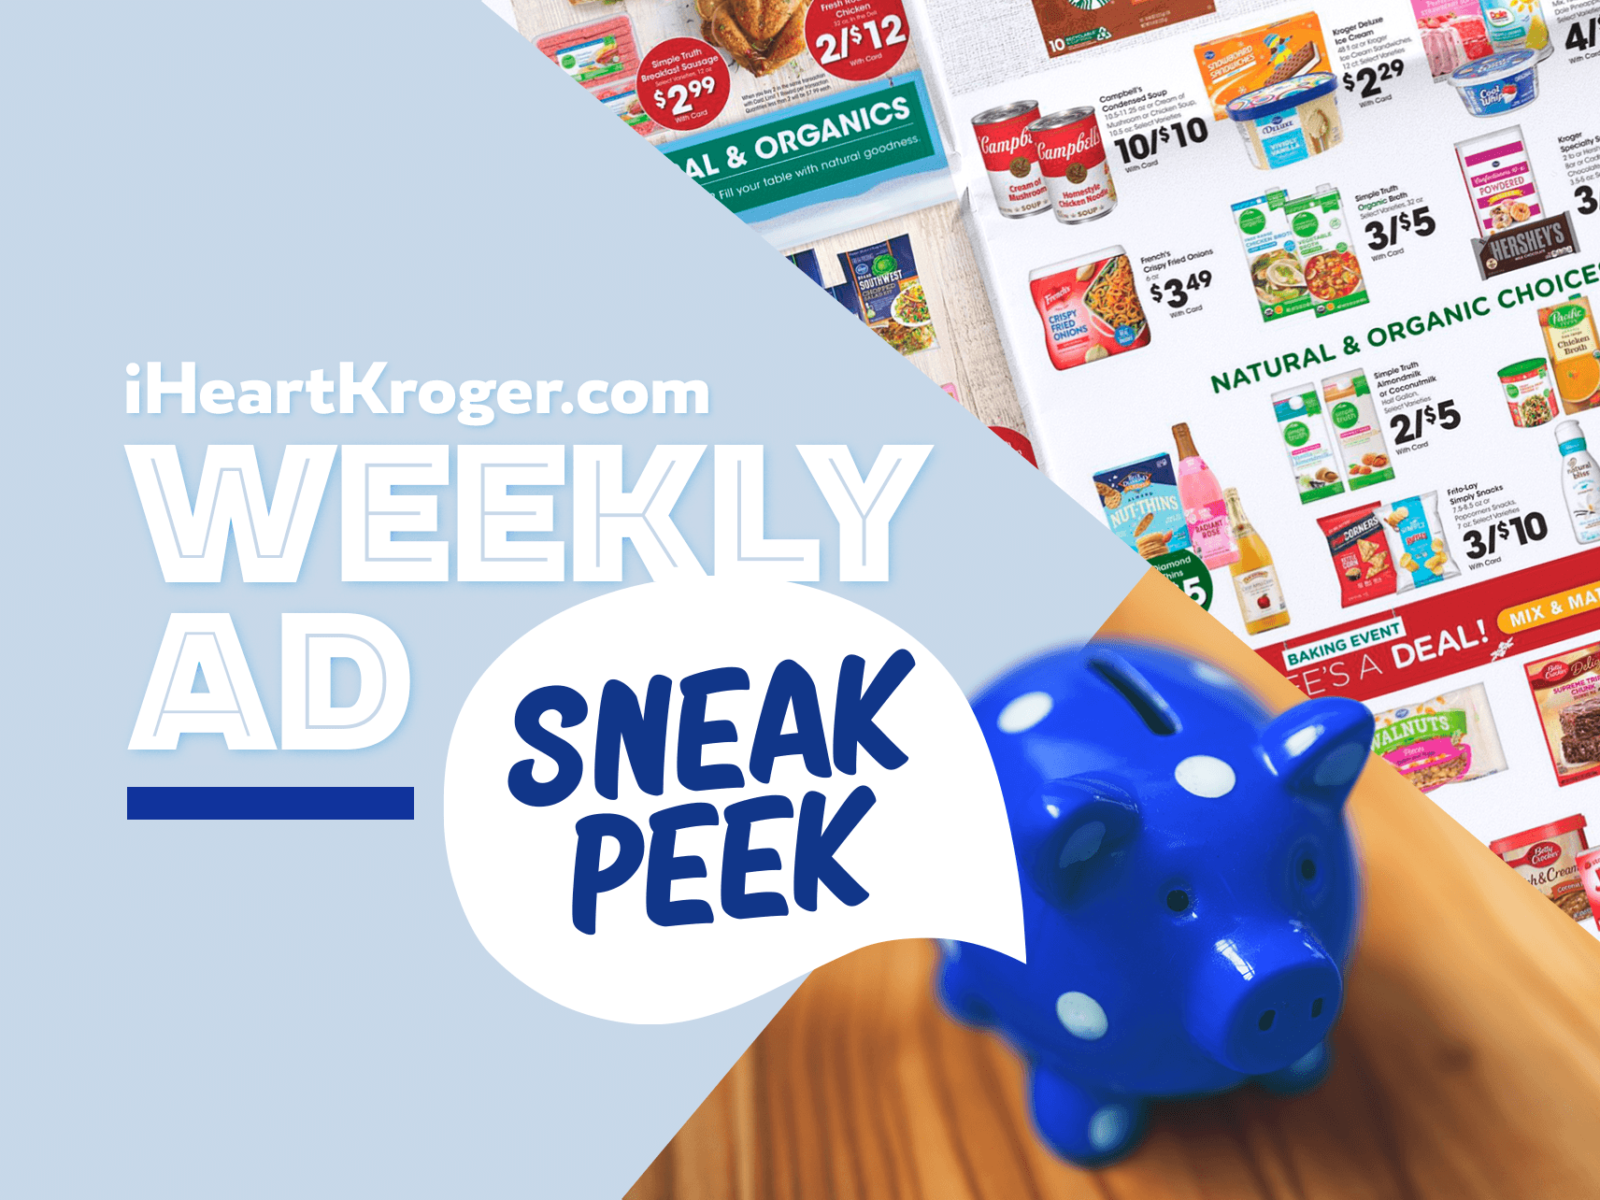 Kroger Ad & Coupons Week Of 8/3 to 8/9